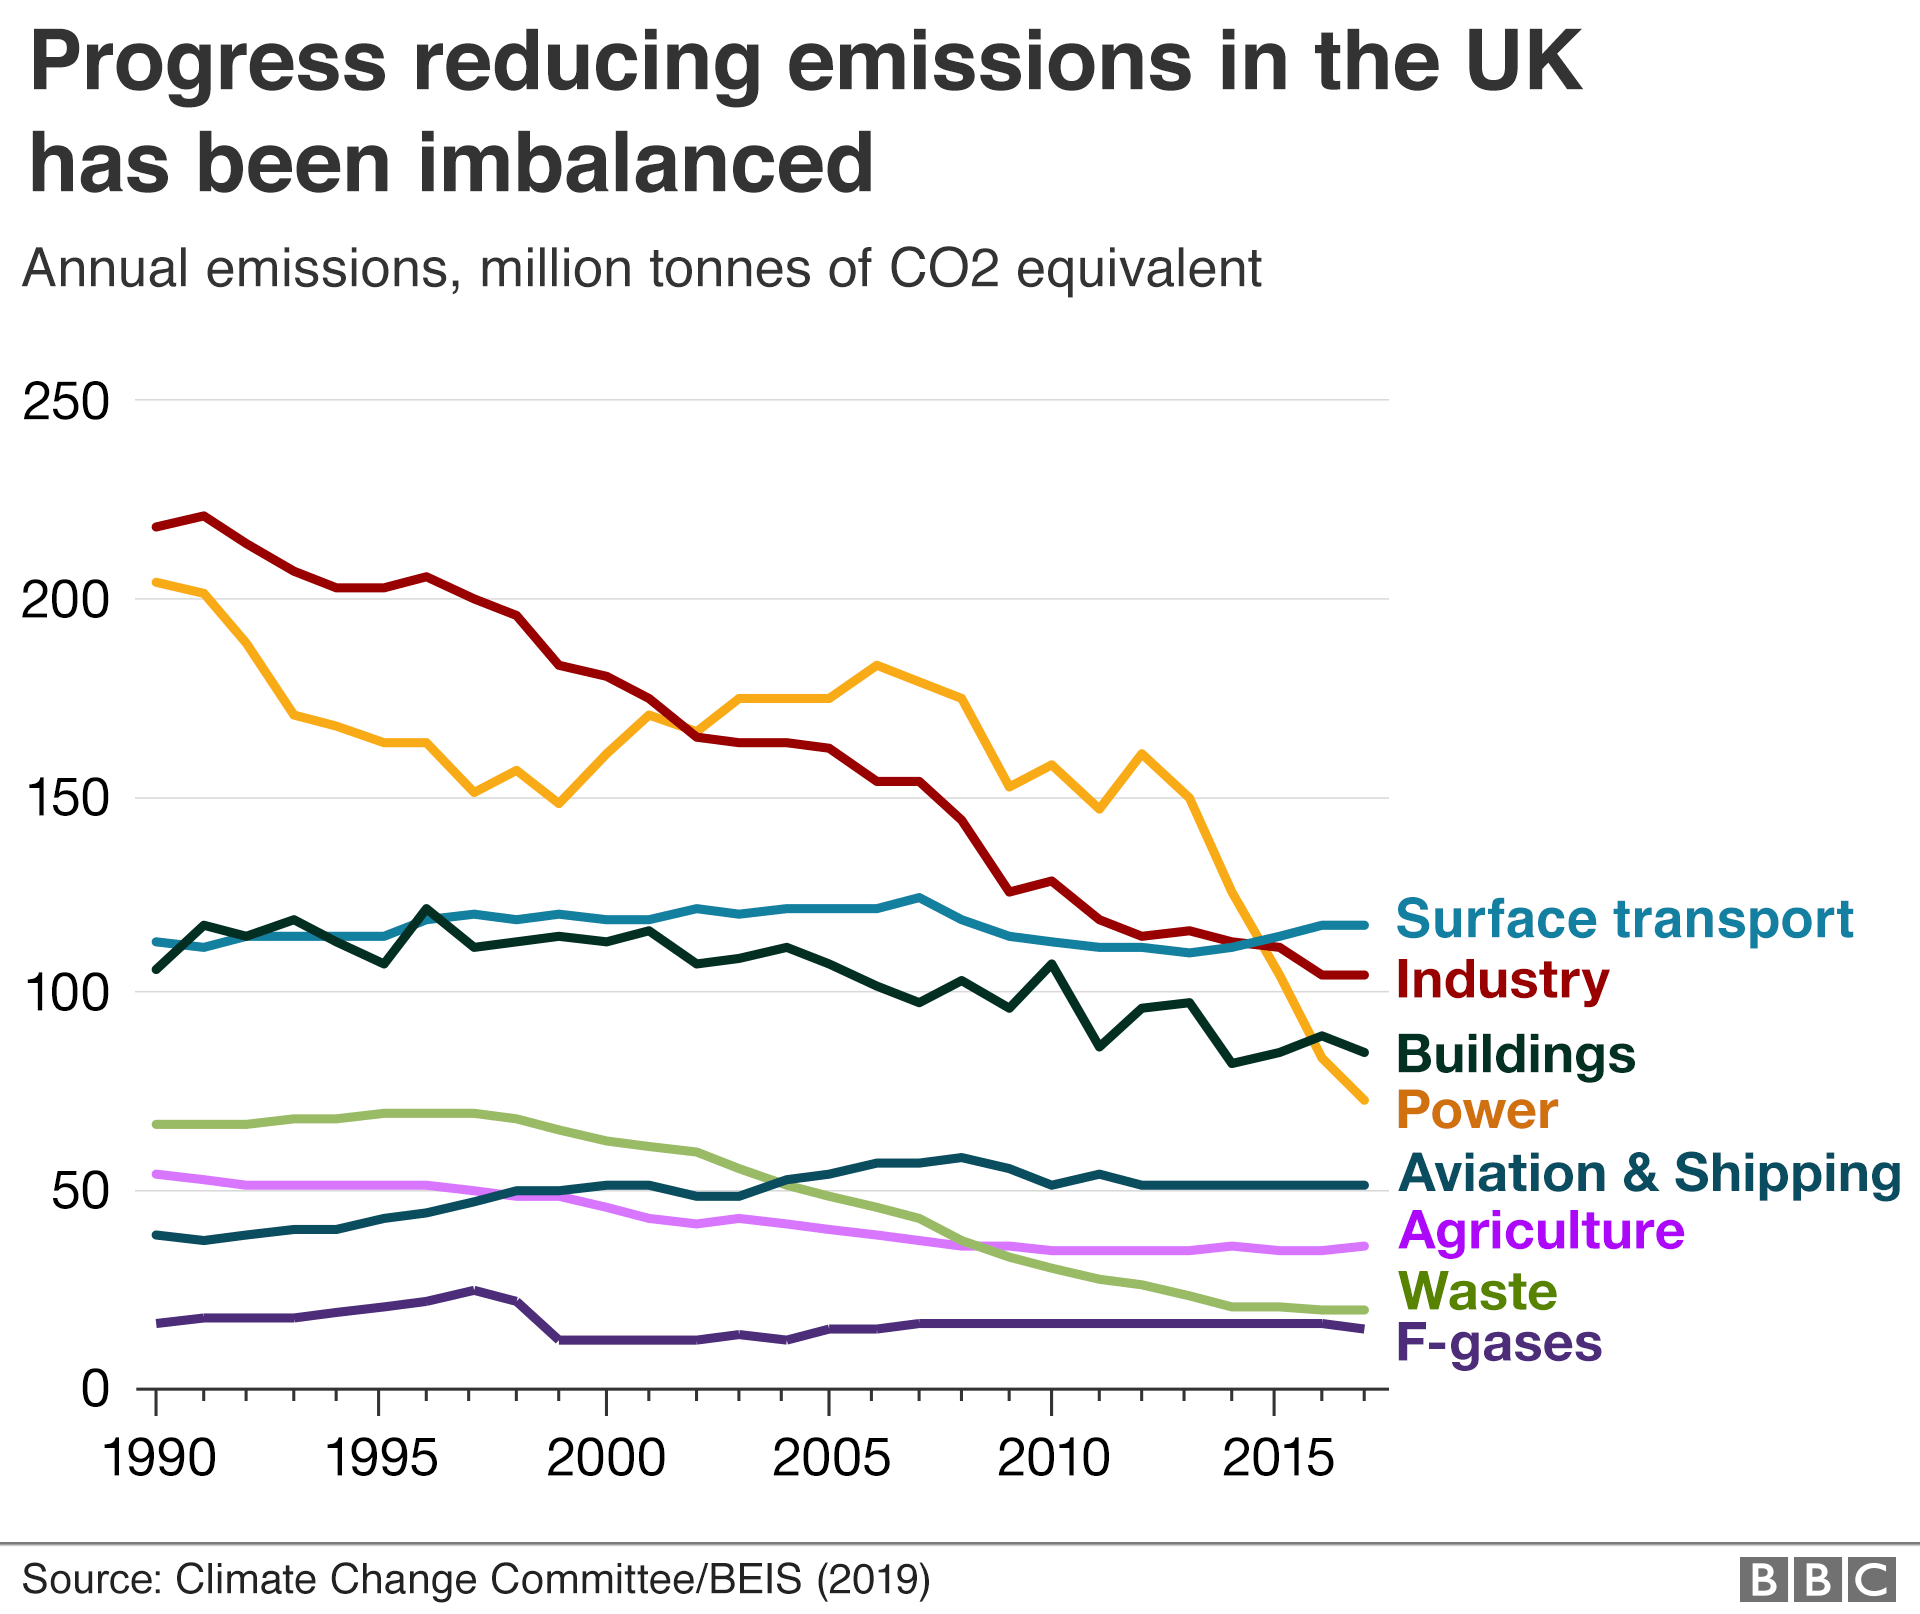 Chart showing progress in reducing emissions across different sectors.